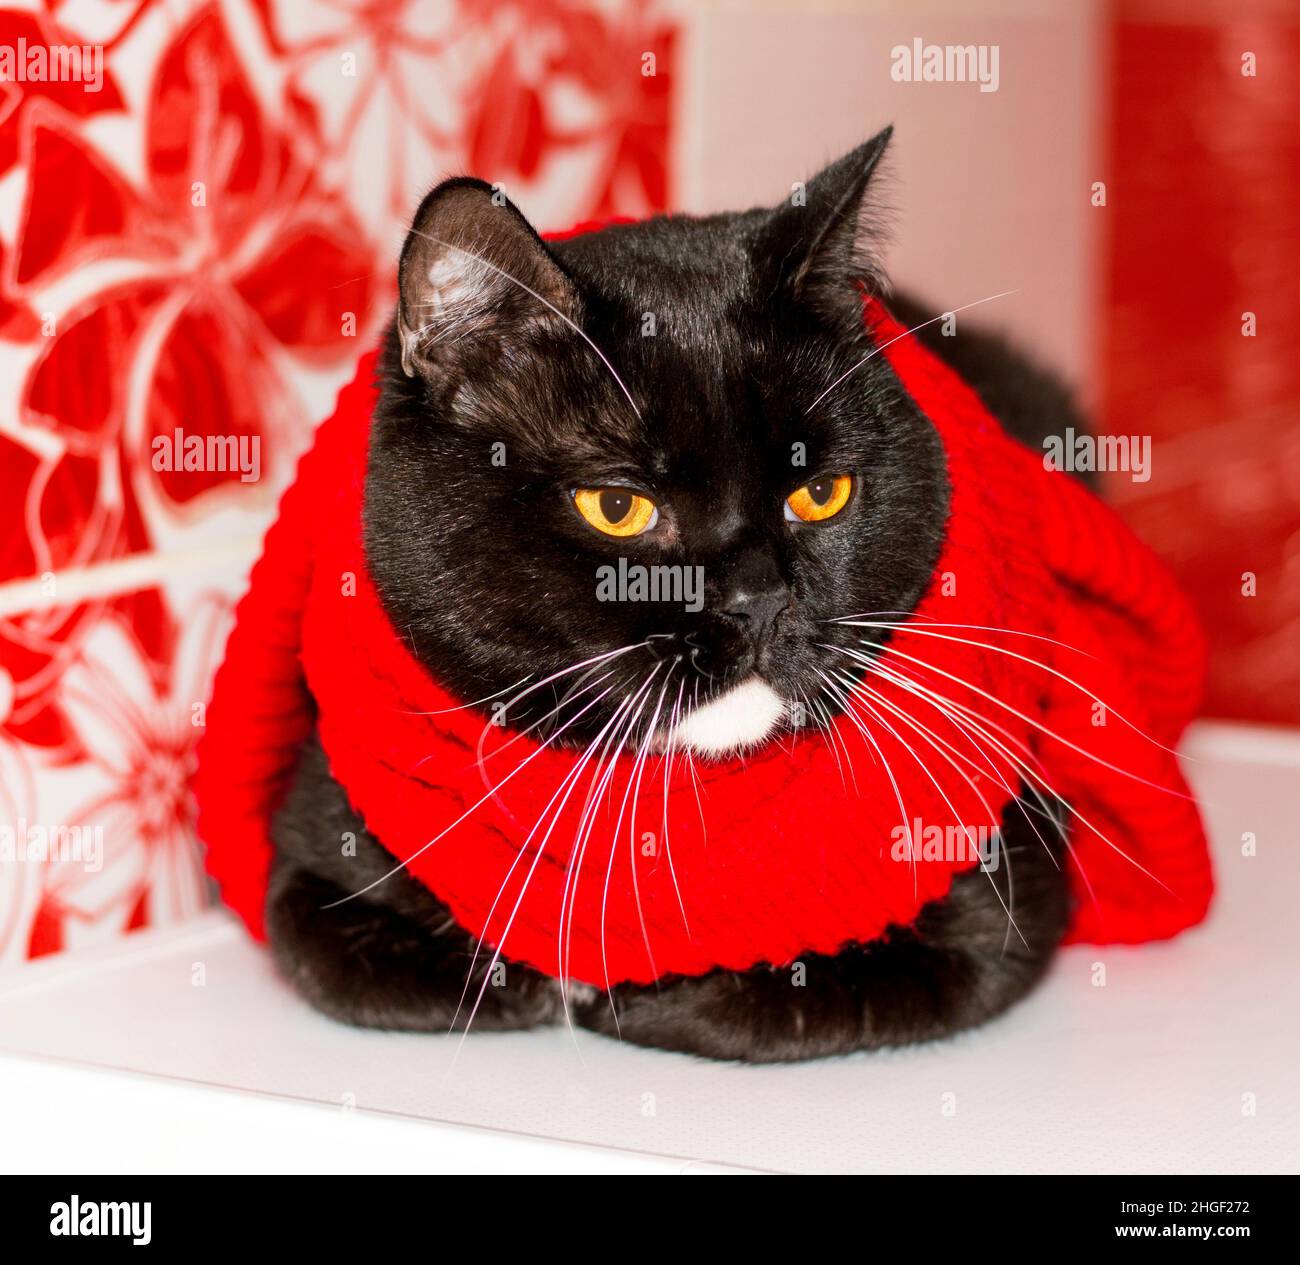 Scottish-british bicolor cat close-up in a red scarf on a red background, winter, theme cats, kittens and cats in the house, pets their photos and the Stock Photo